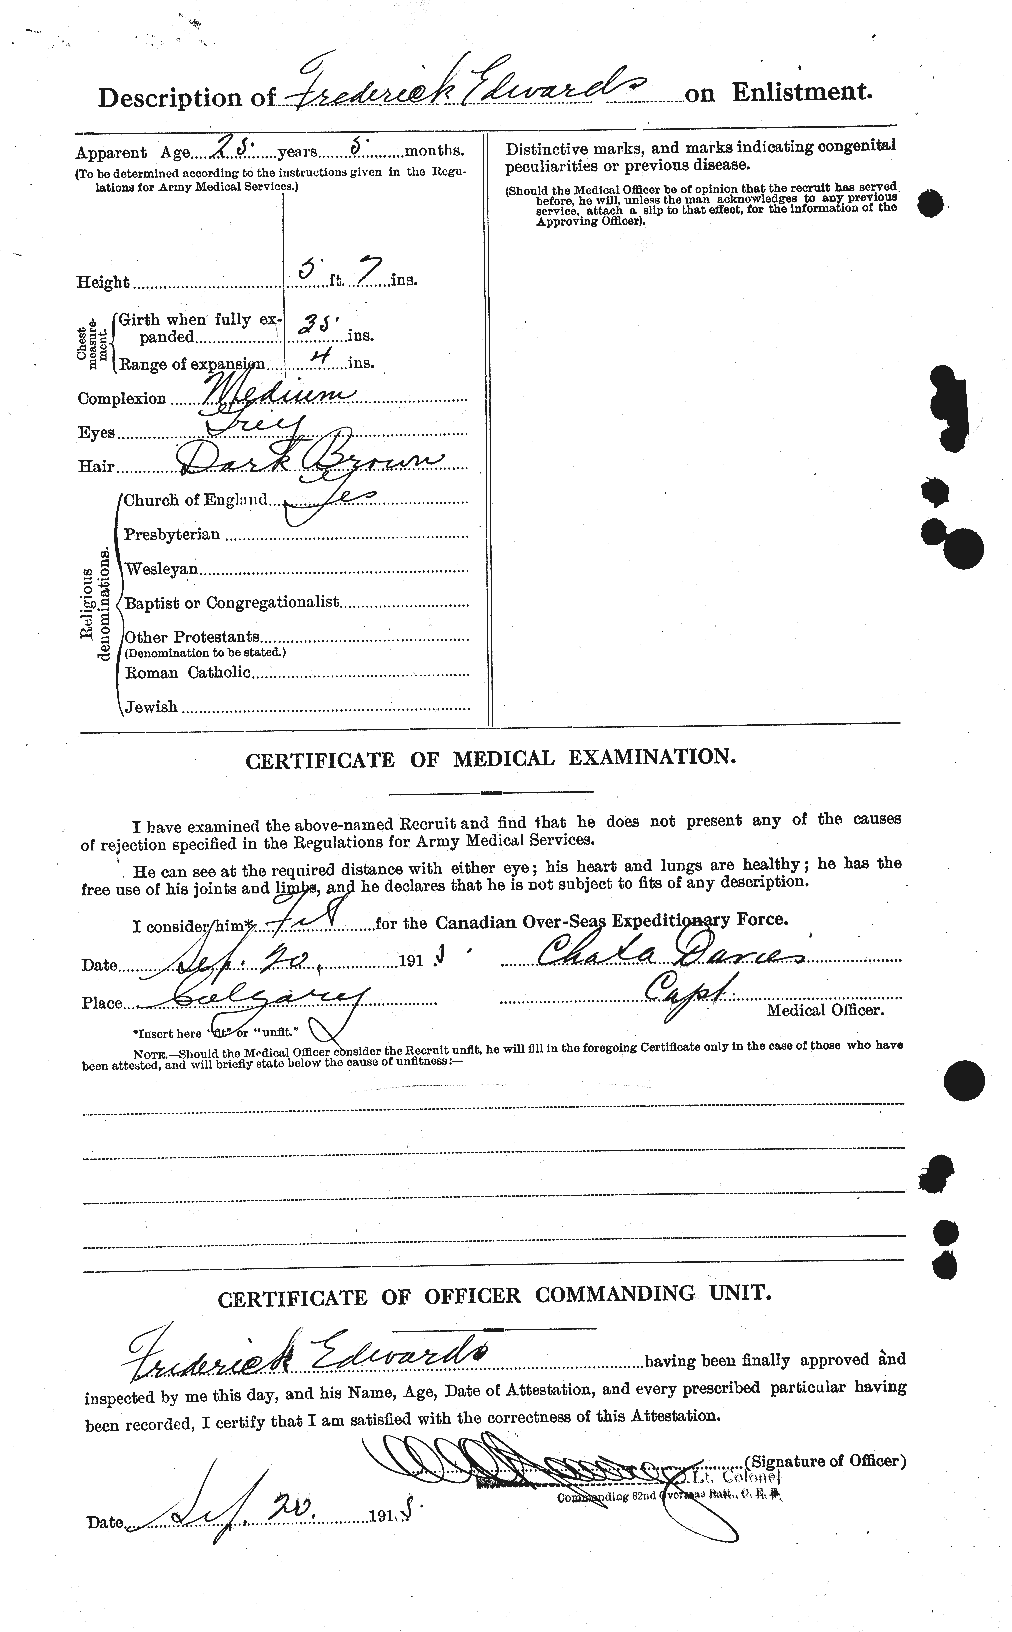 Personnel Records of the First World War - CEF 309067b